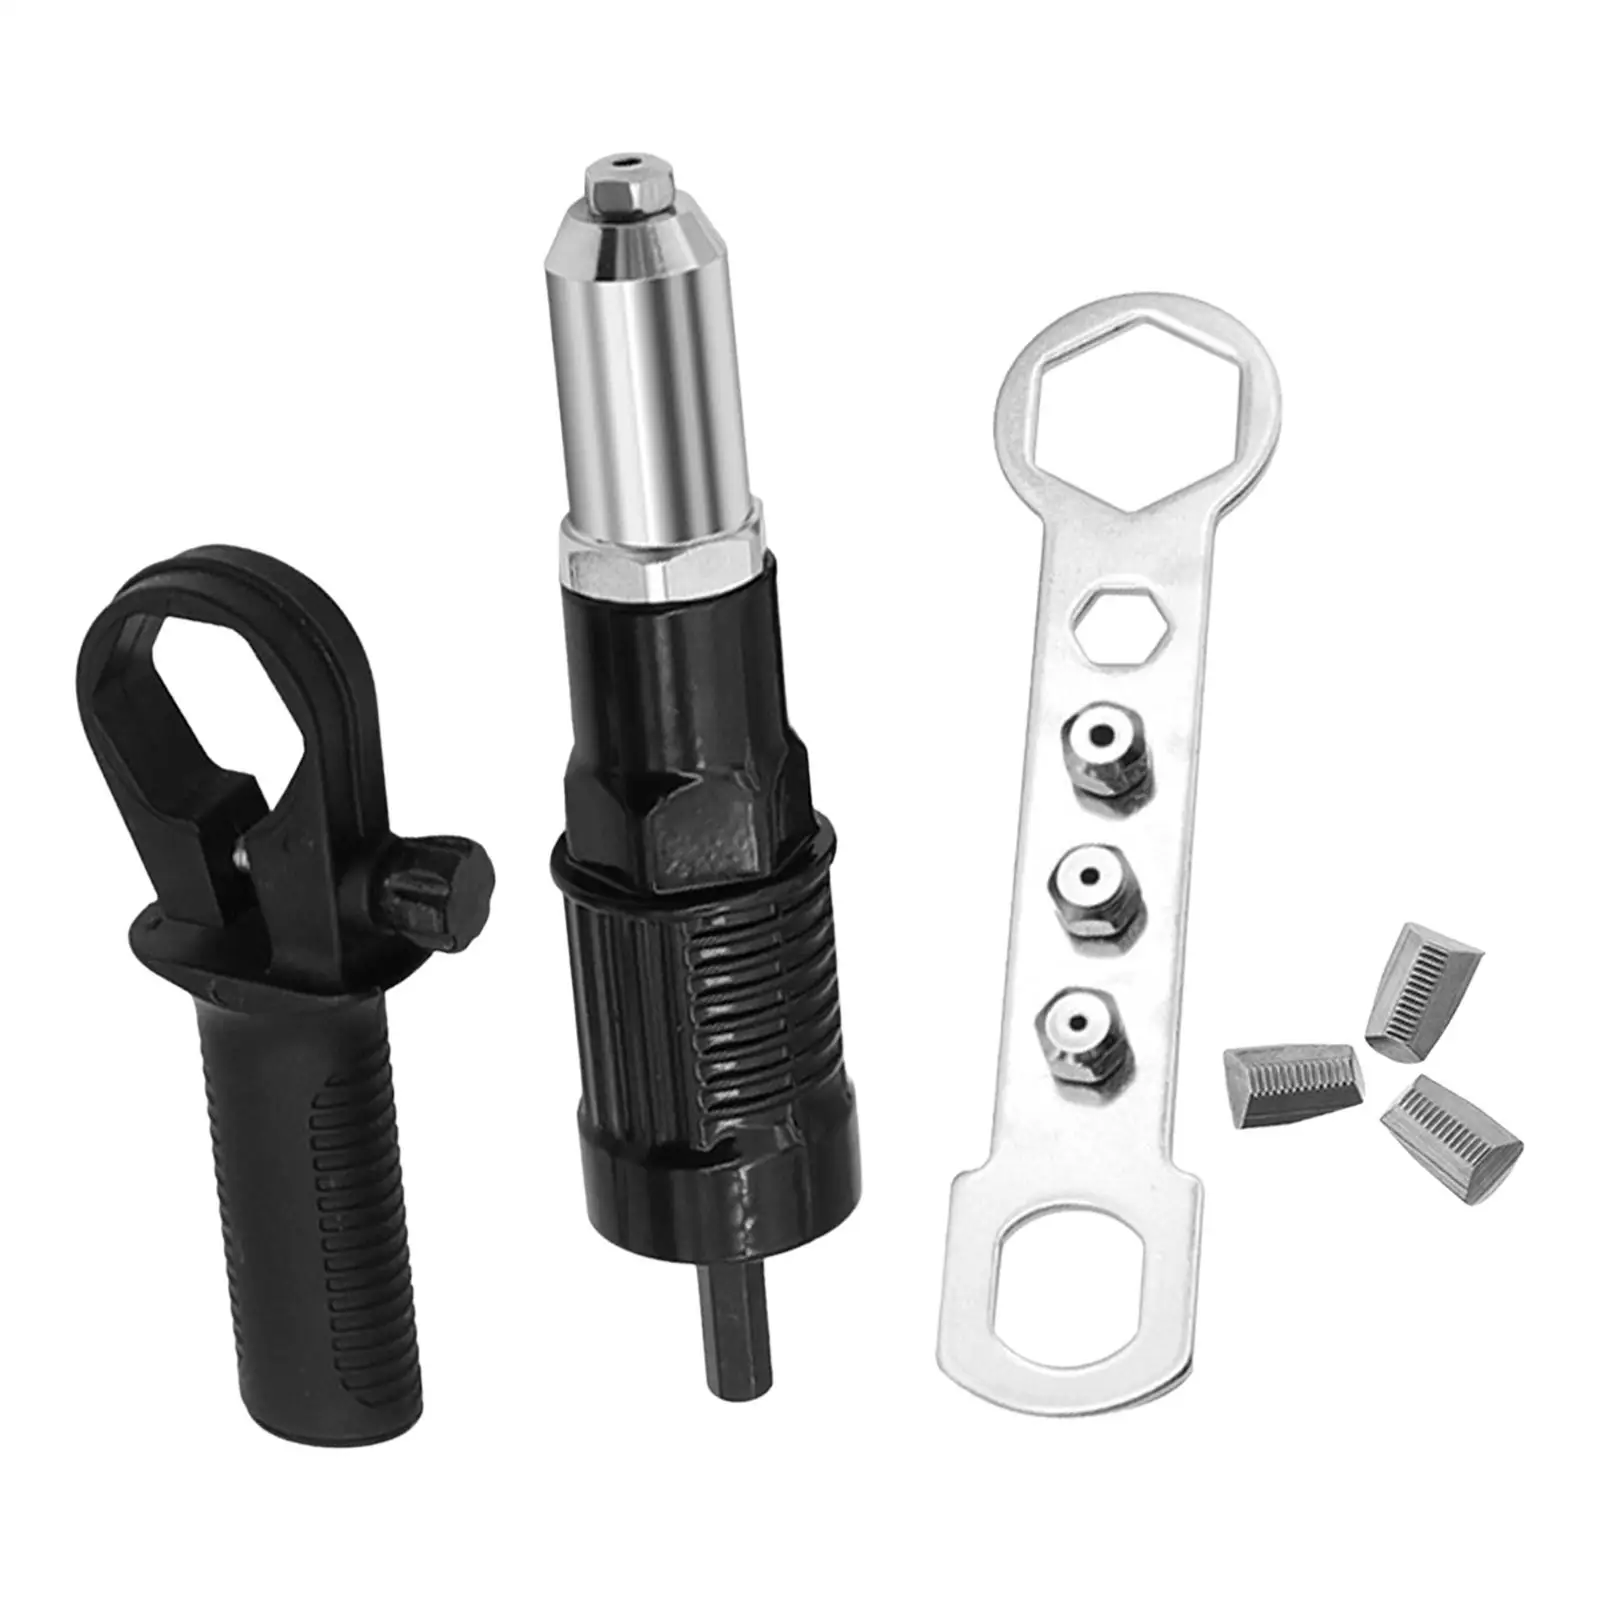 Rivet Connector Cordless Riveting Drill Joint Adapter Cordless Drill Rivet Adapter Riveting Electric Rivet Joint Pulling